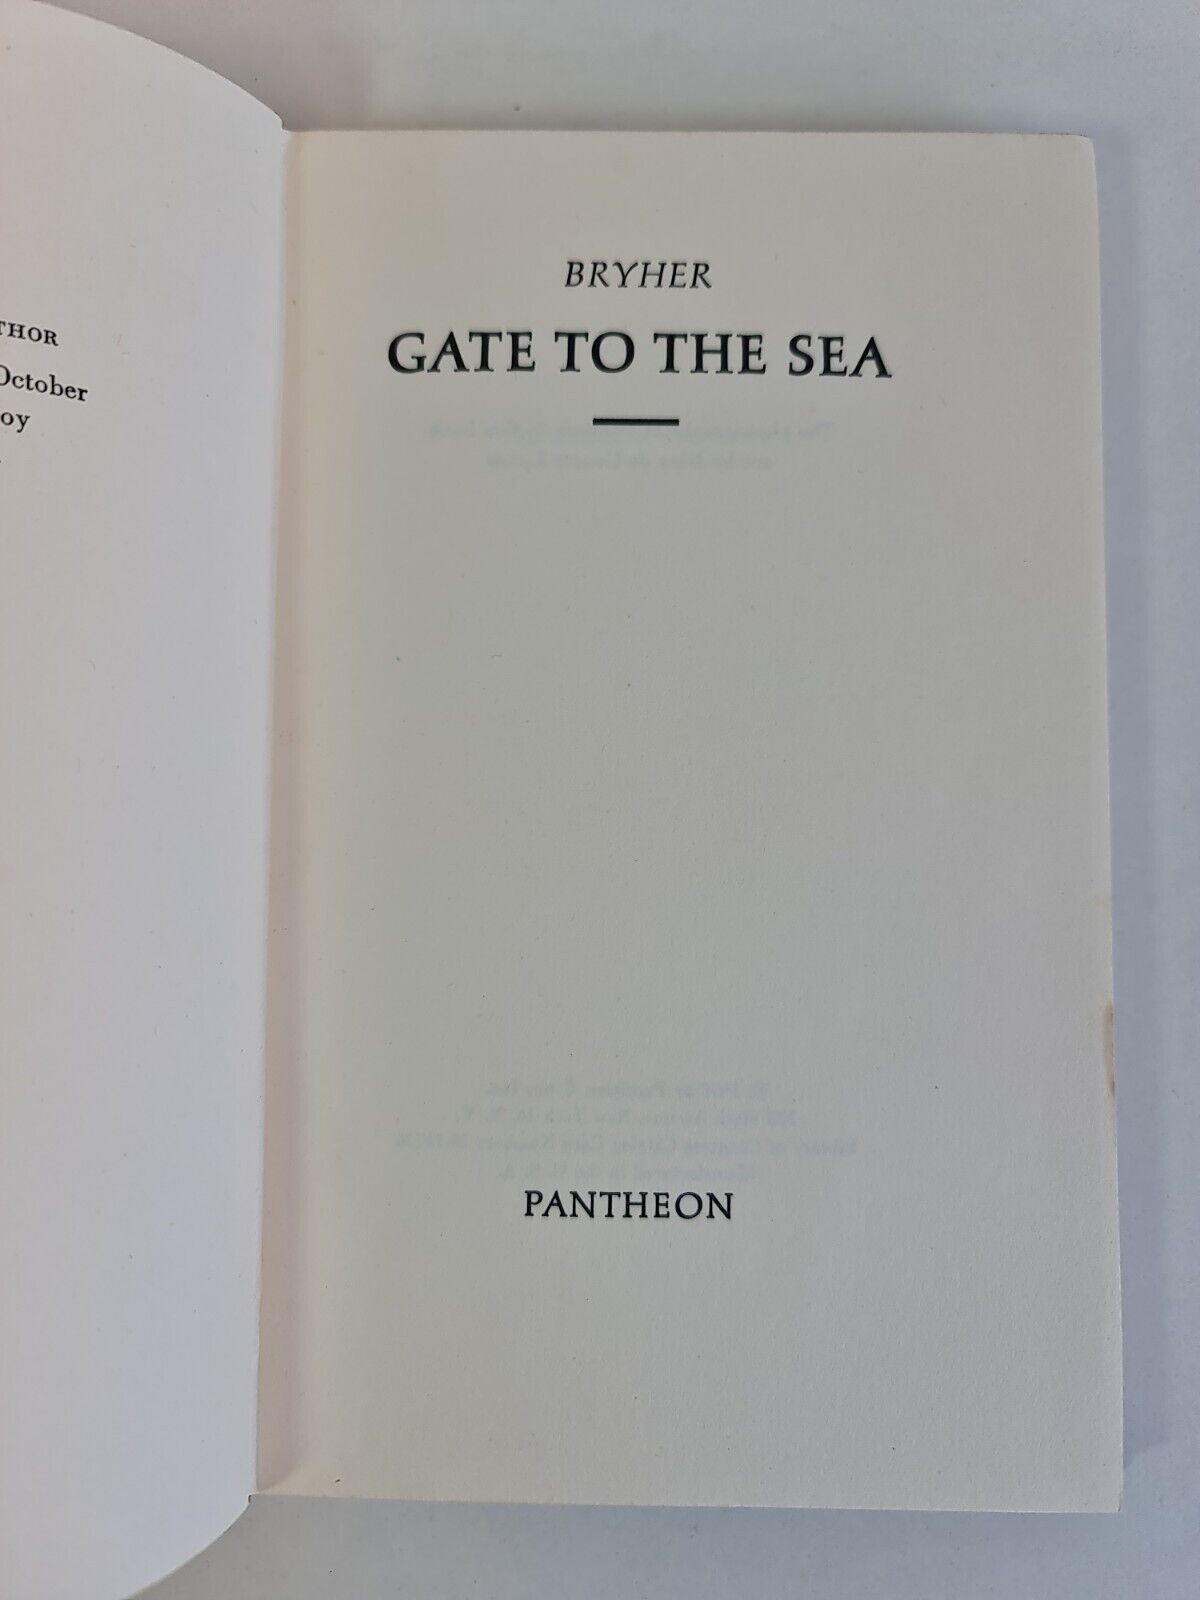 Gate to the Sea by Bryher (1958)